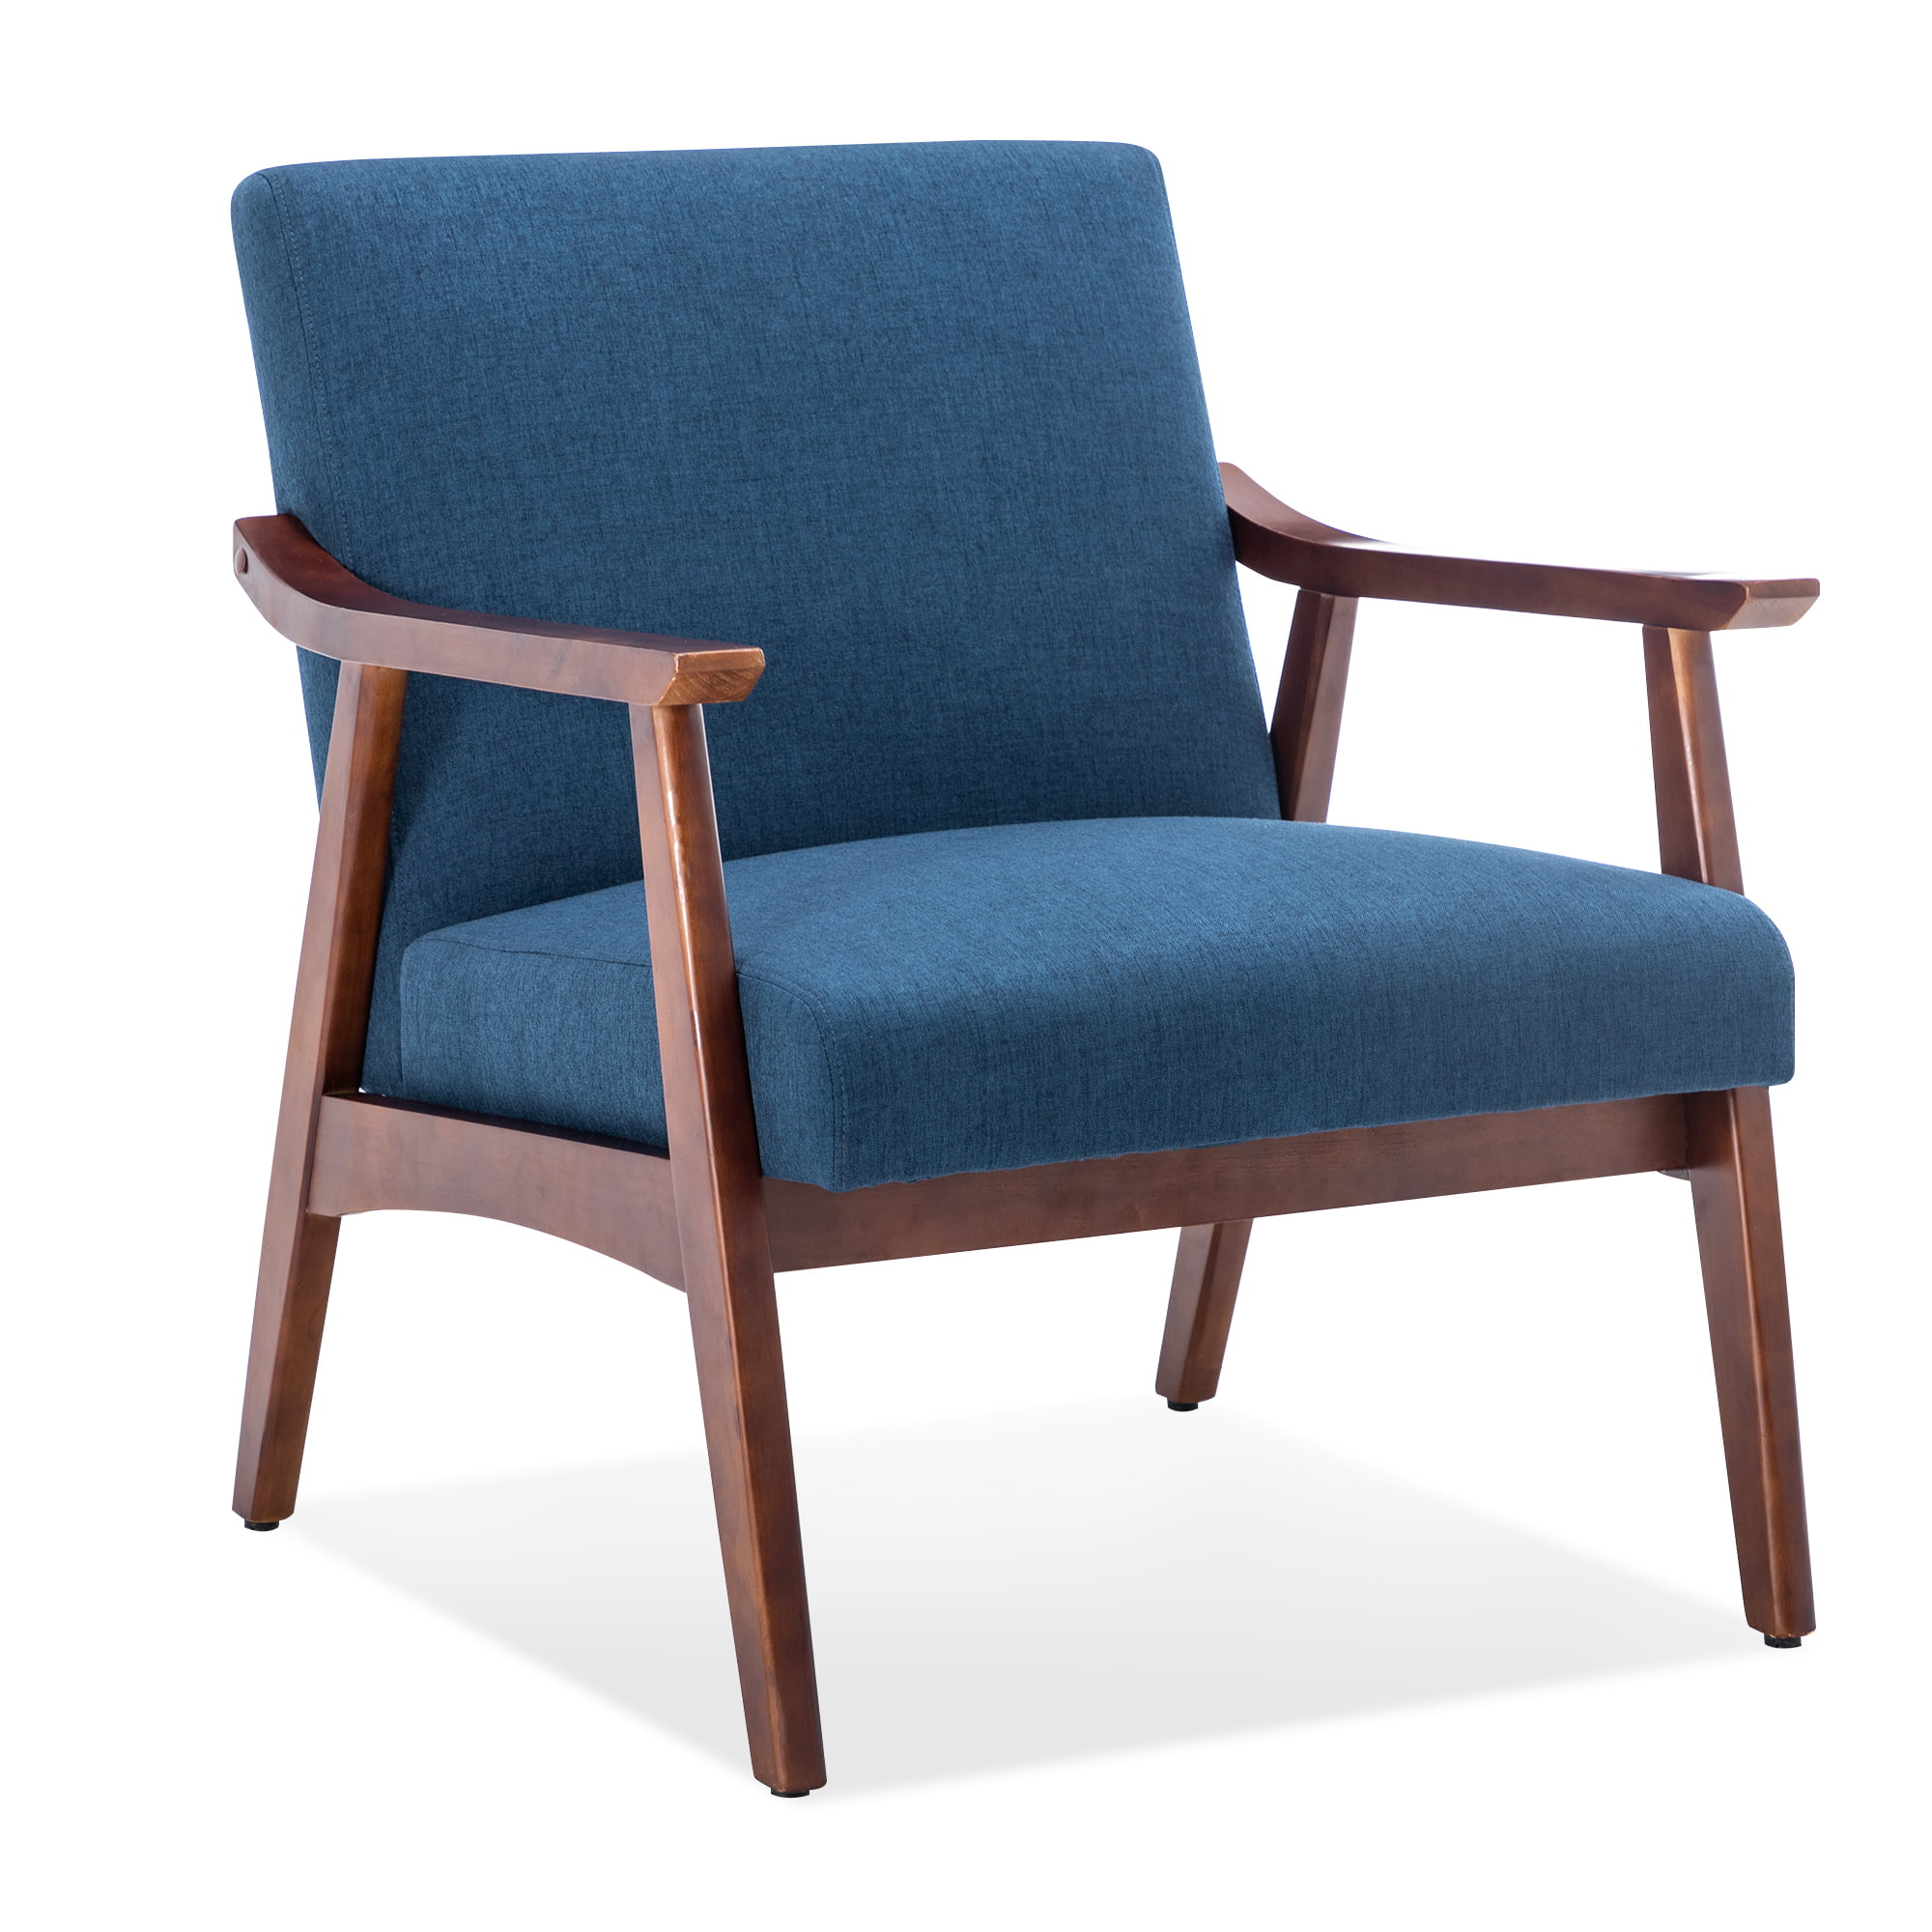 BELLEZE Mid-Century Modern Accent Armchair Solid Hardwood Upholstered